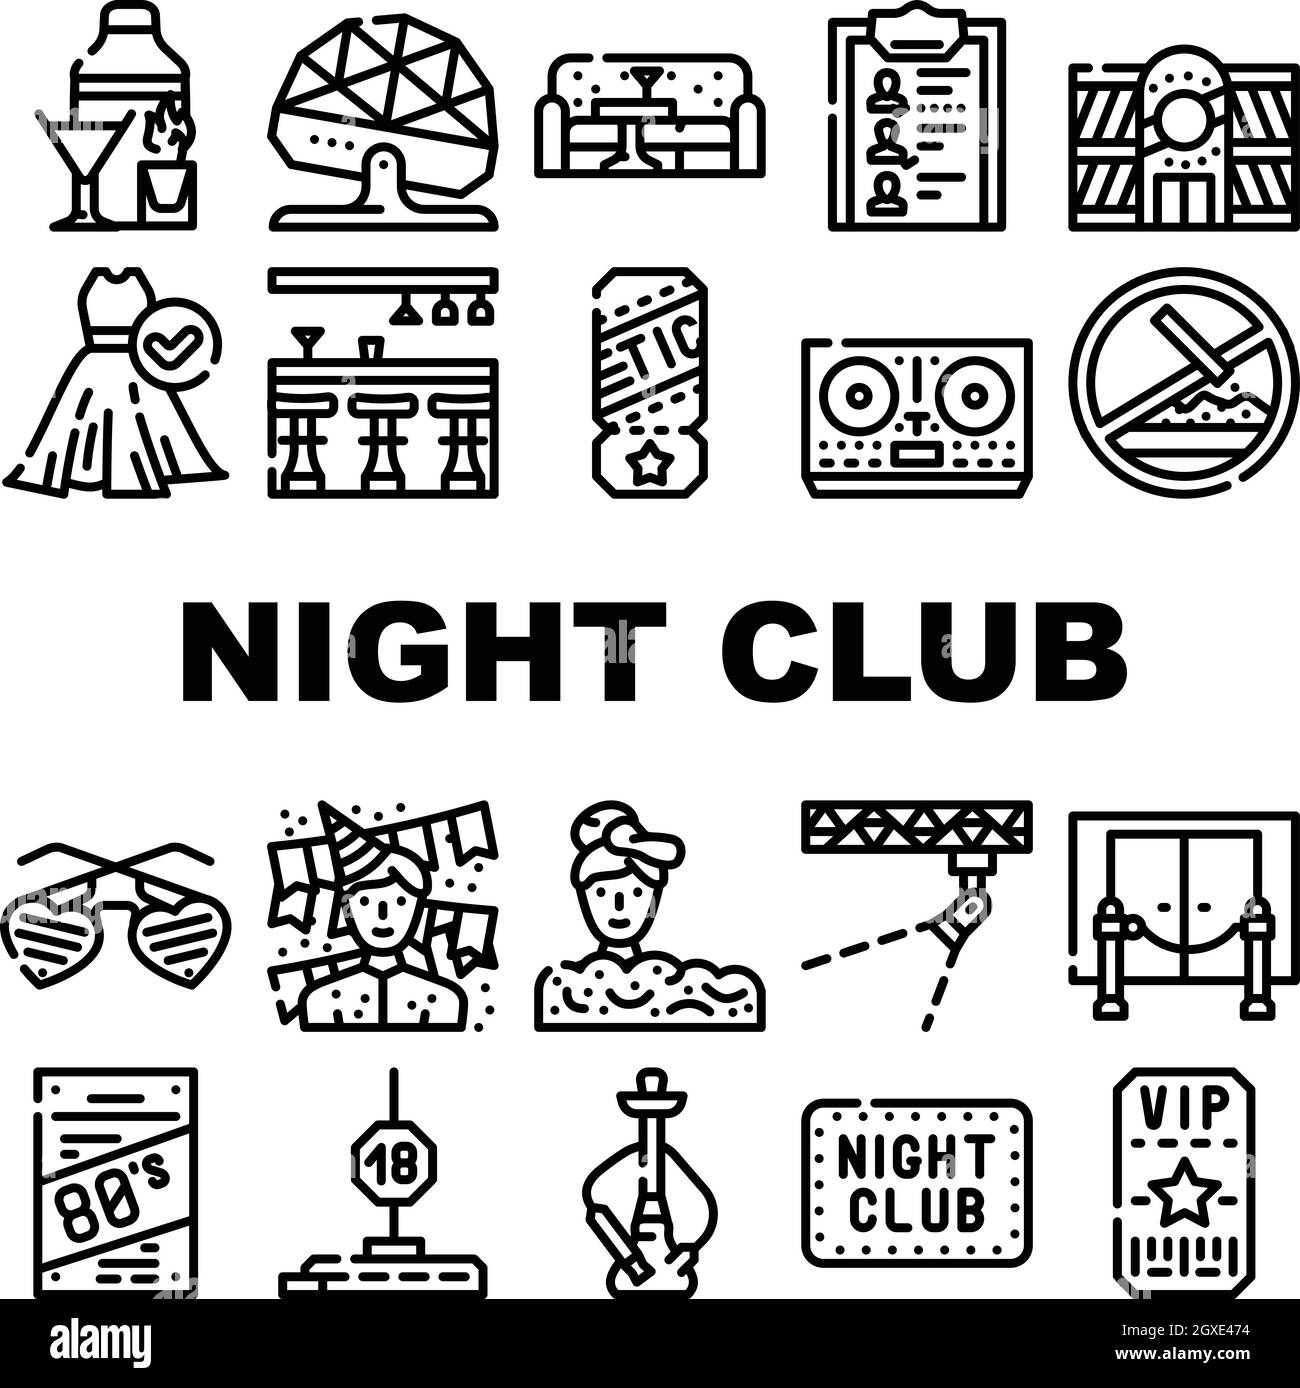 Night club Black and White Stock Photos & Images - Alamy